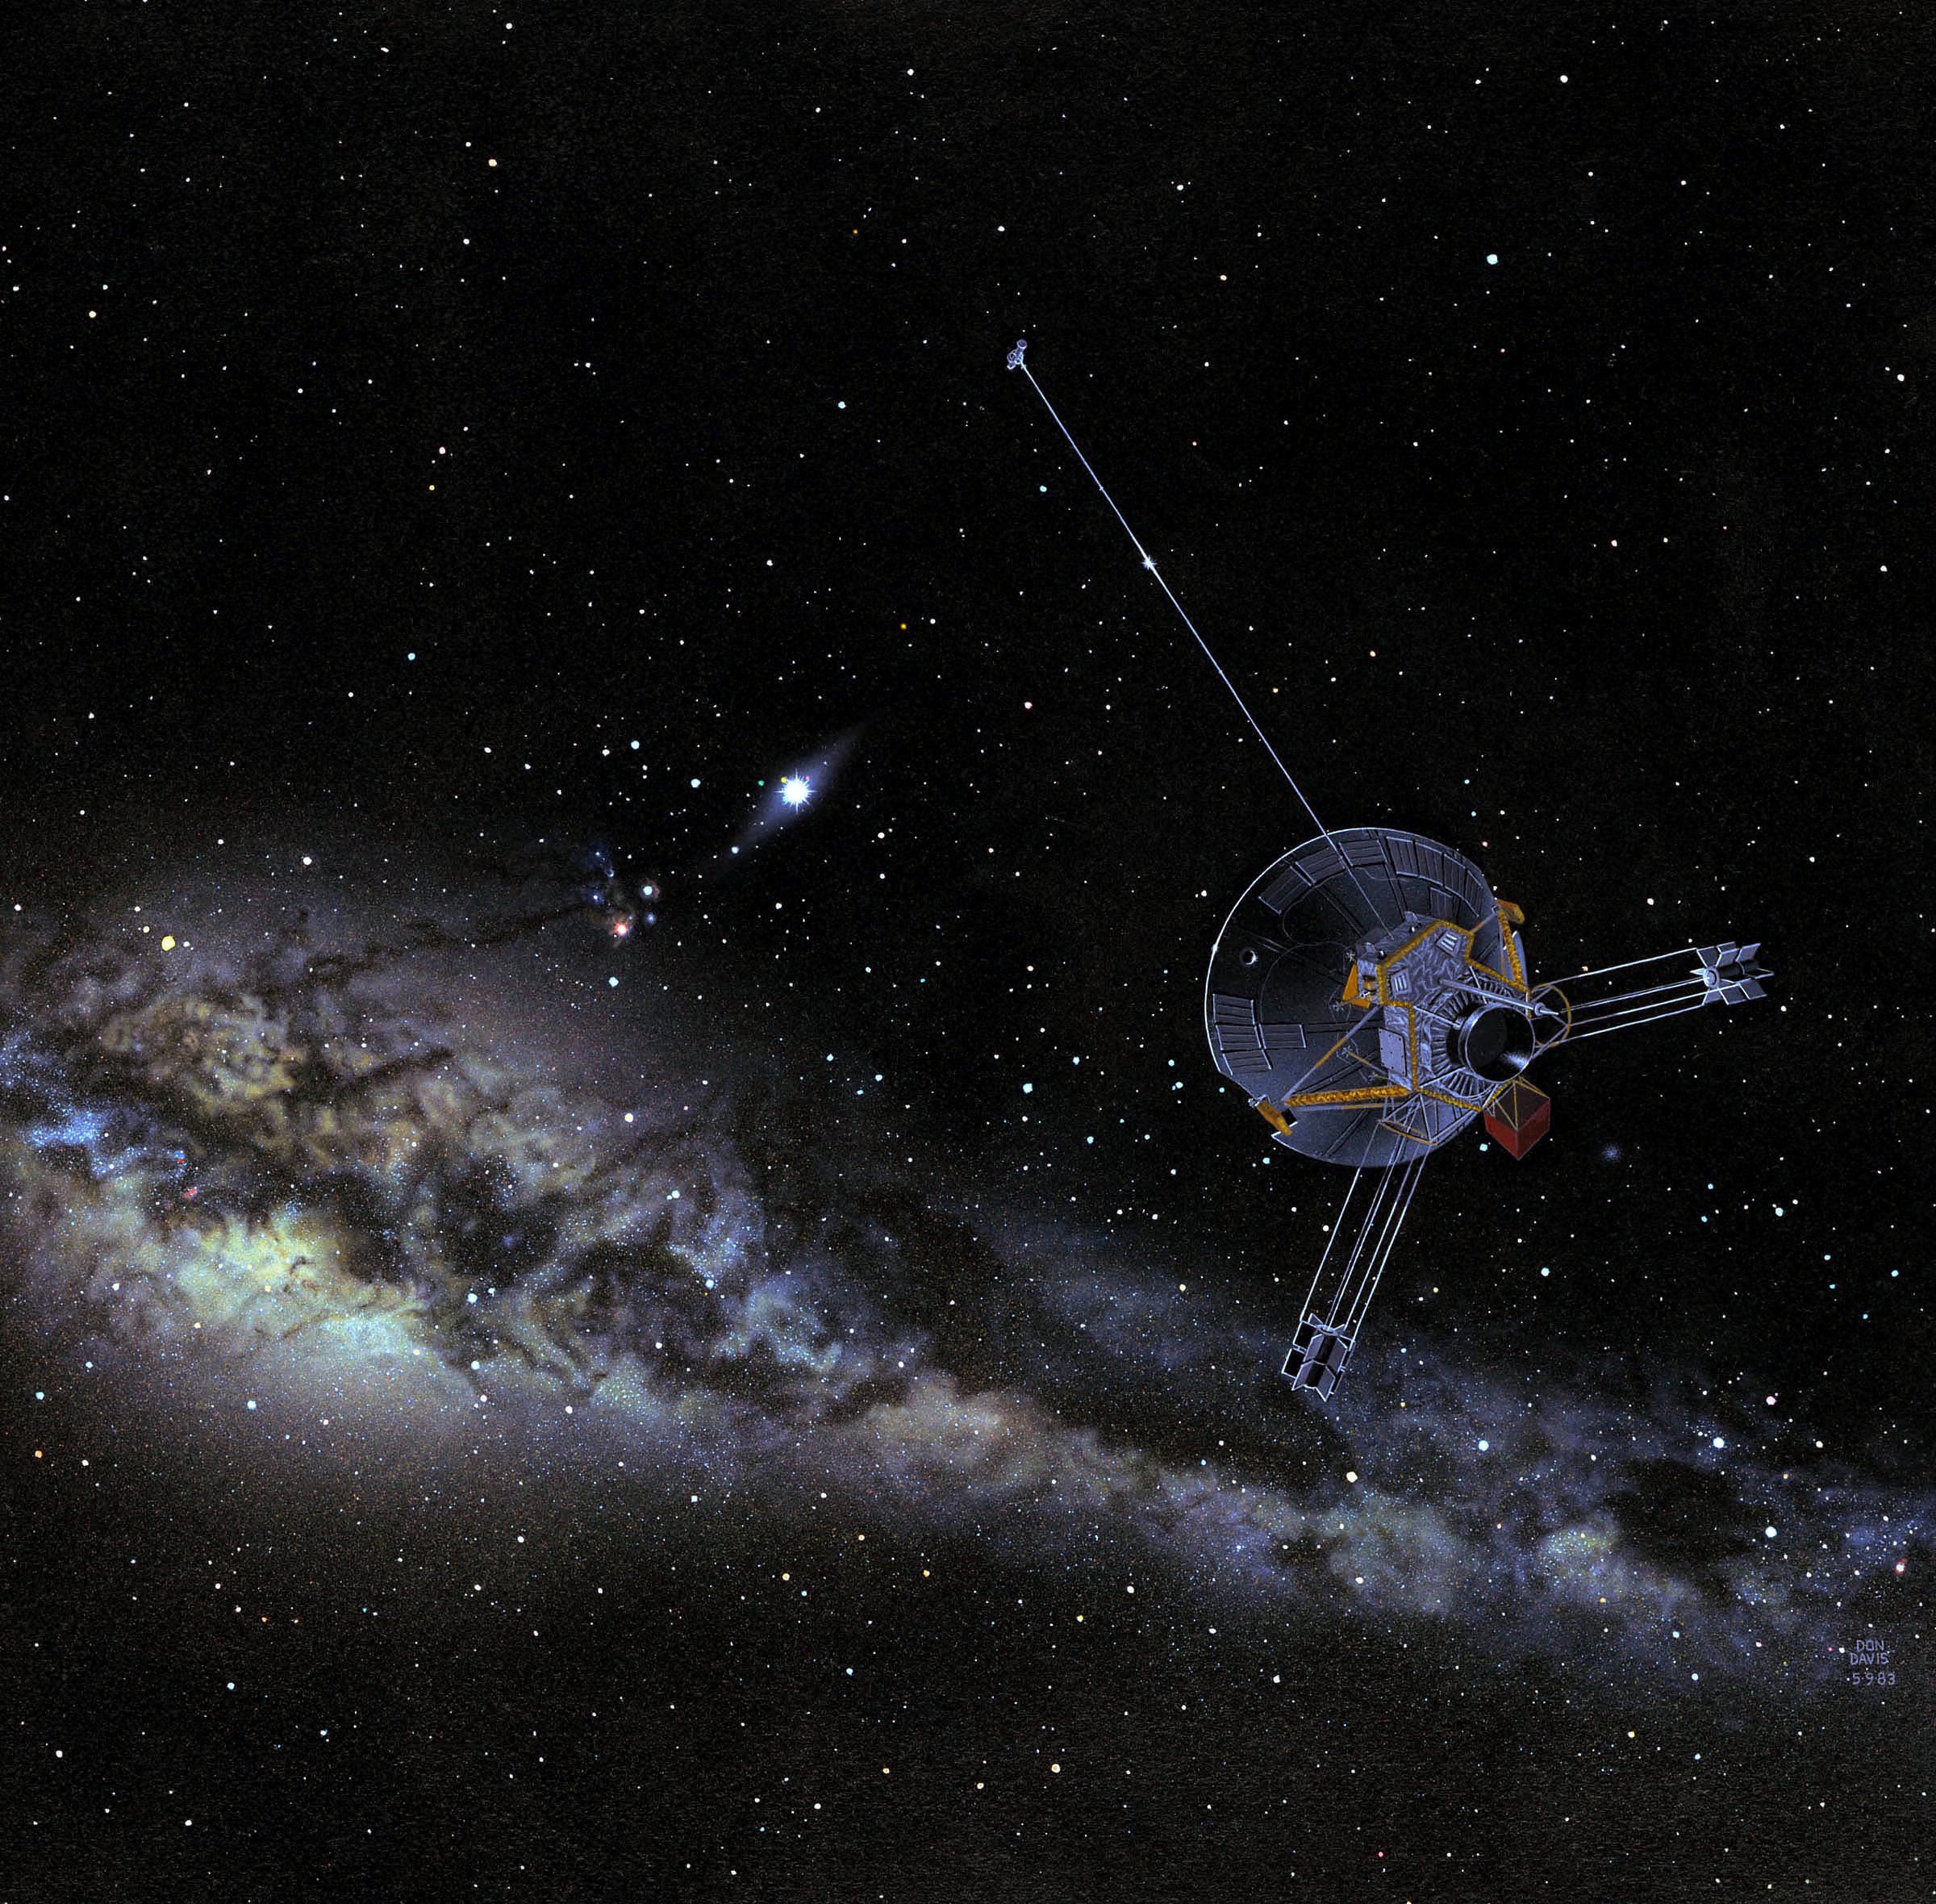 Illustration of spacecraft with Milky Way in the background.